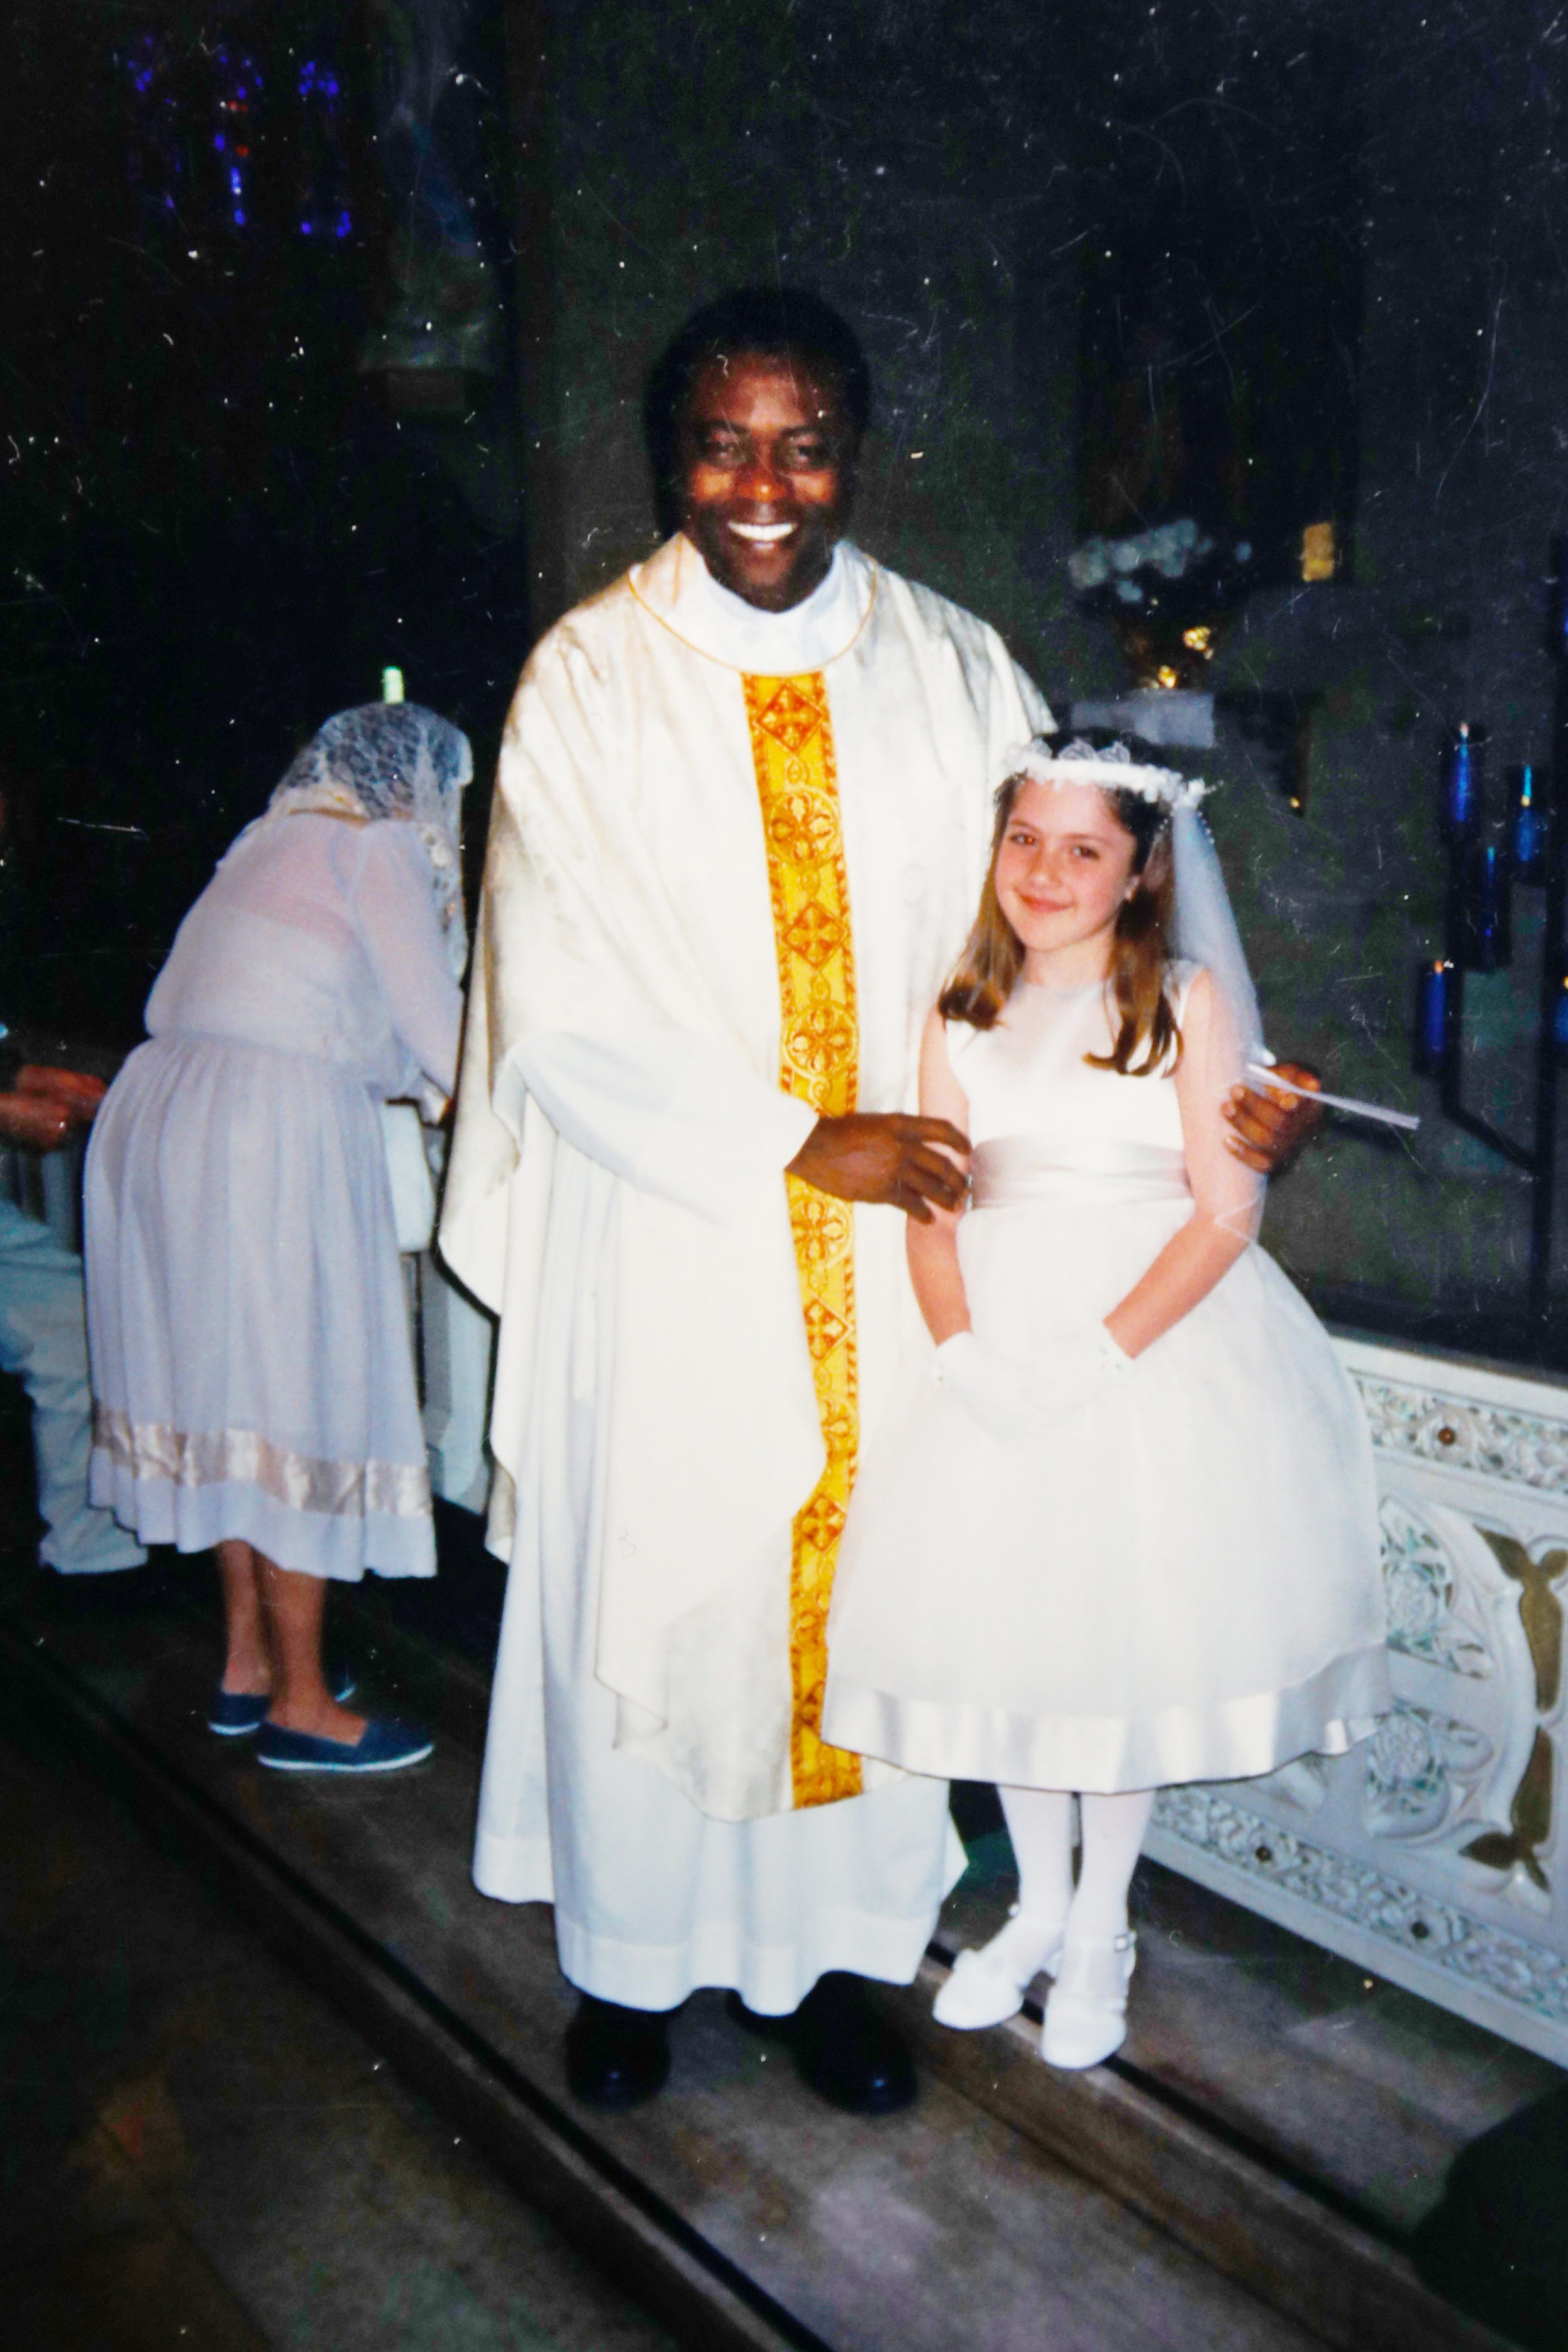 This undated photo provided by Mary Rose Maher shows her as a child standing with the Rev. Komlan Dem Houndjame at The Assumption of the Blessed Virgin Mary Church in Detroit. Two years after arriving at The Assumption of the Blessed Virgin Mary Church in 1999, Detroit Archdiocese officials said they asked Houndjame to return to his home country, Togo, after learning of accusations of sexual misconduct against him in Detroit and at an earlier posting in Florida. Instead he went to a treatment facility in St. Louis. In 2002, Detroit police arrested him and charged him with sexually assaulting a member of the church ' s choir.